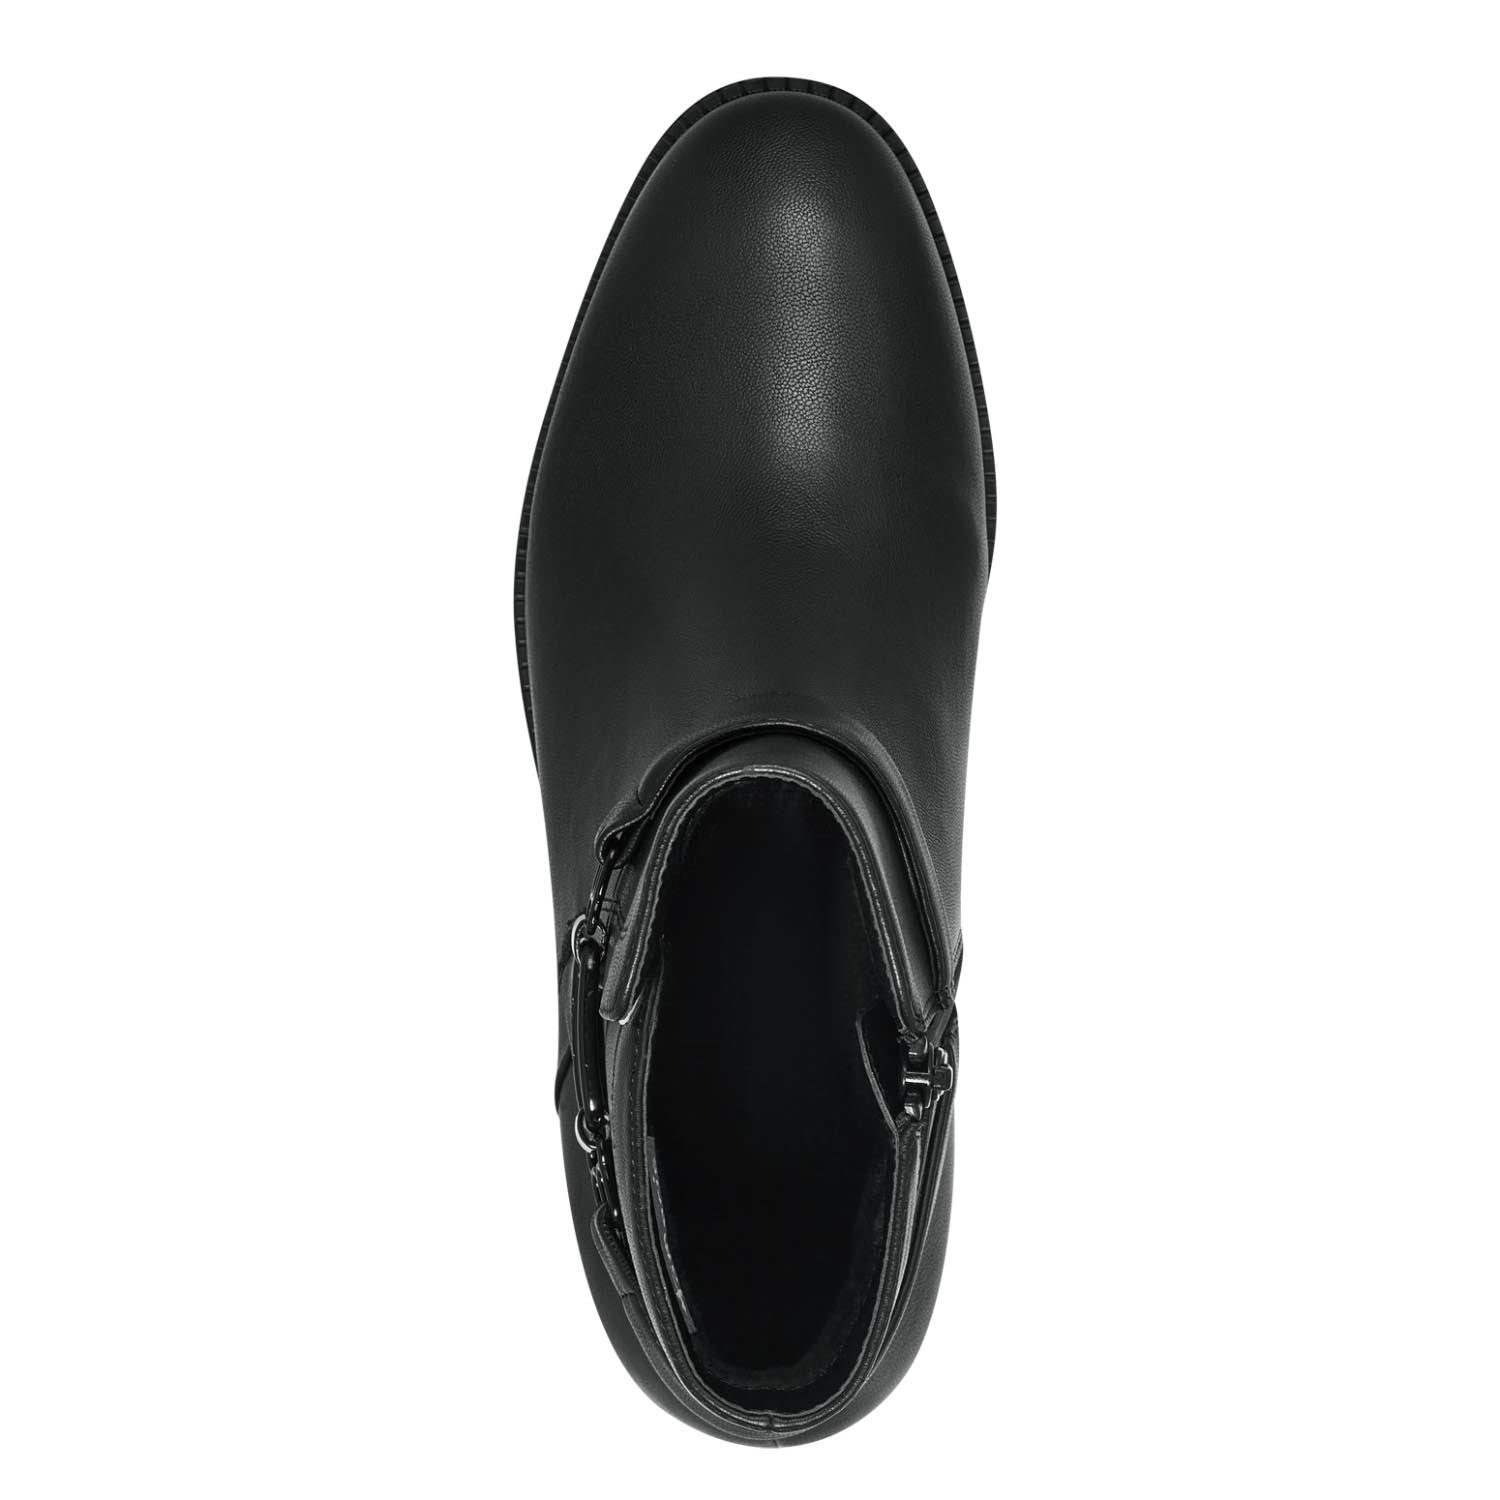 Top view of the black ankle boot, showcasing the smooth finish.